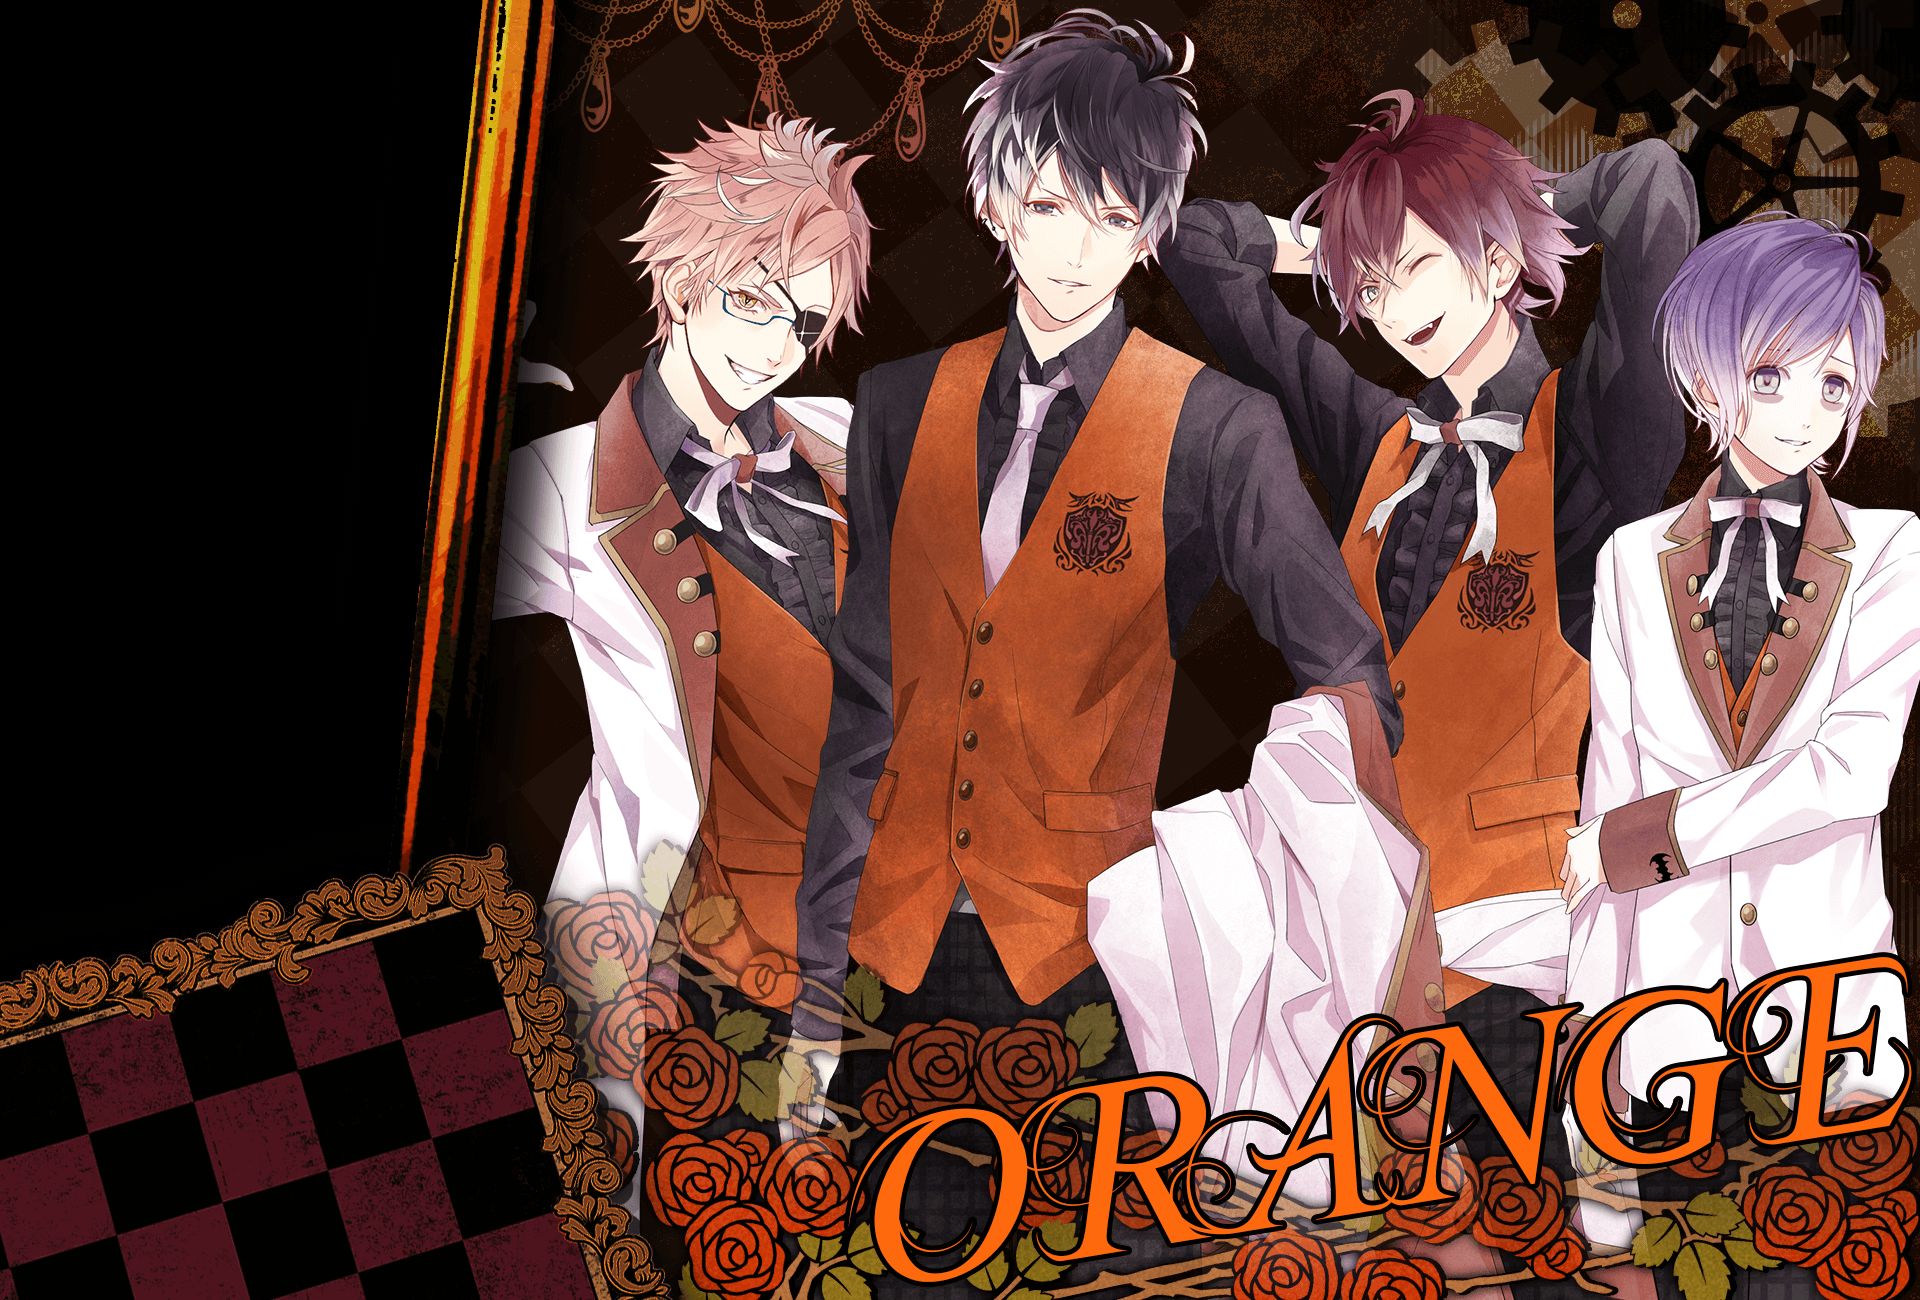 Pin by Sarah Surber on Diabolik lovers  Diabolik lovers wallpaper Diabolik  lovers ayato Diabolik lovers